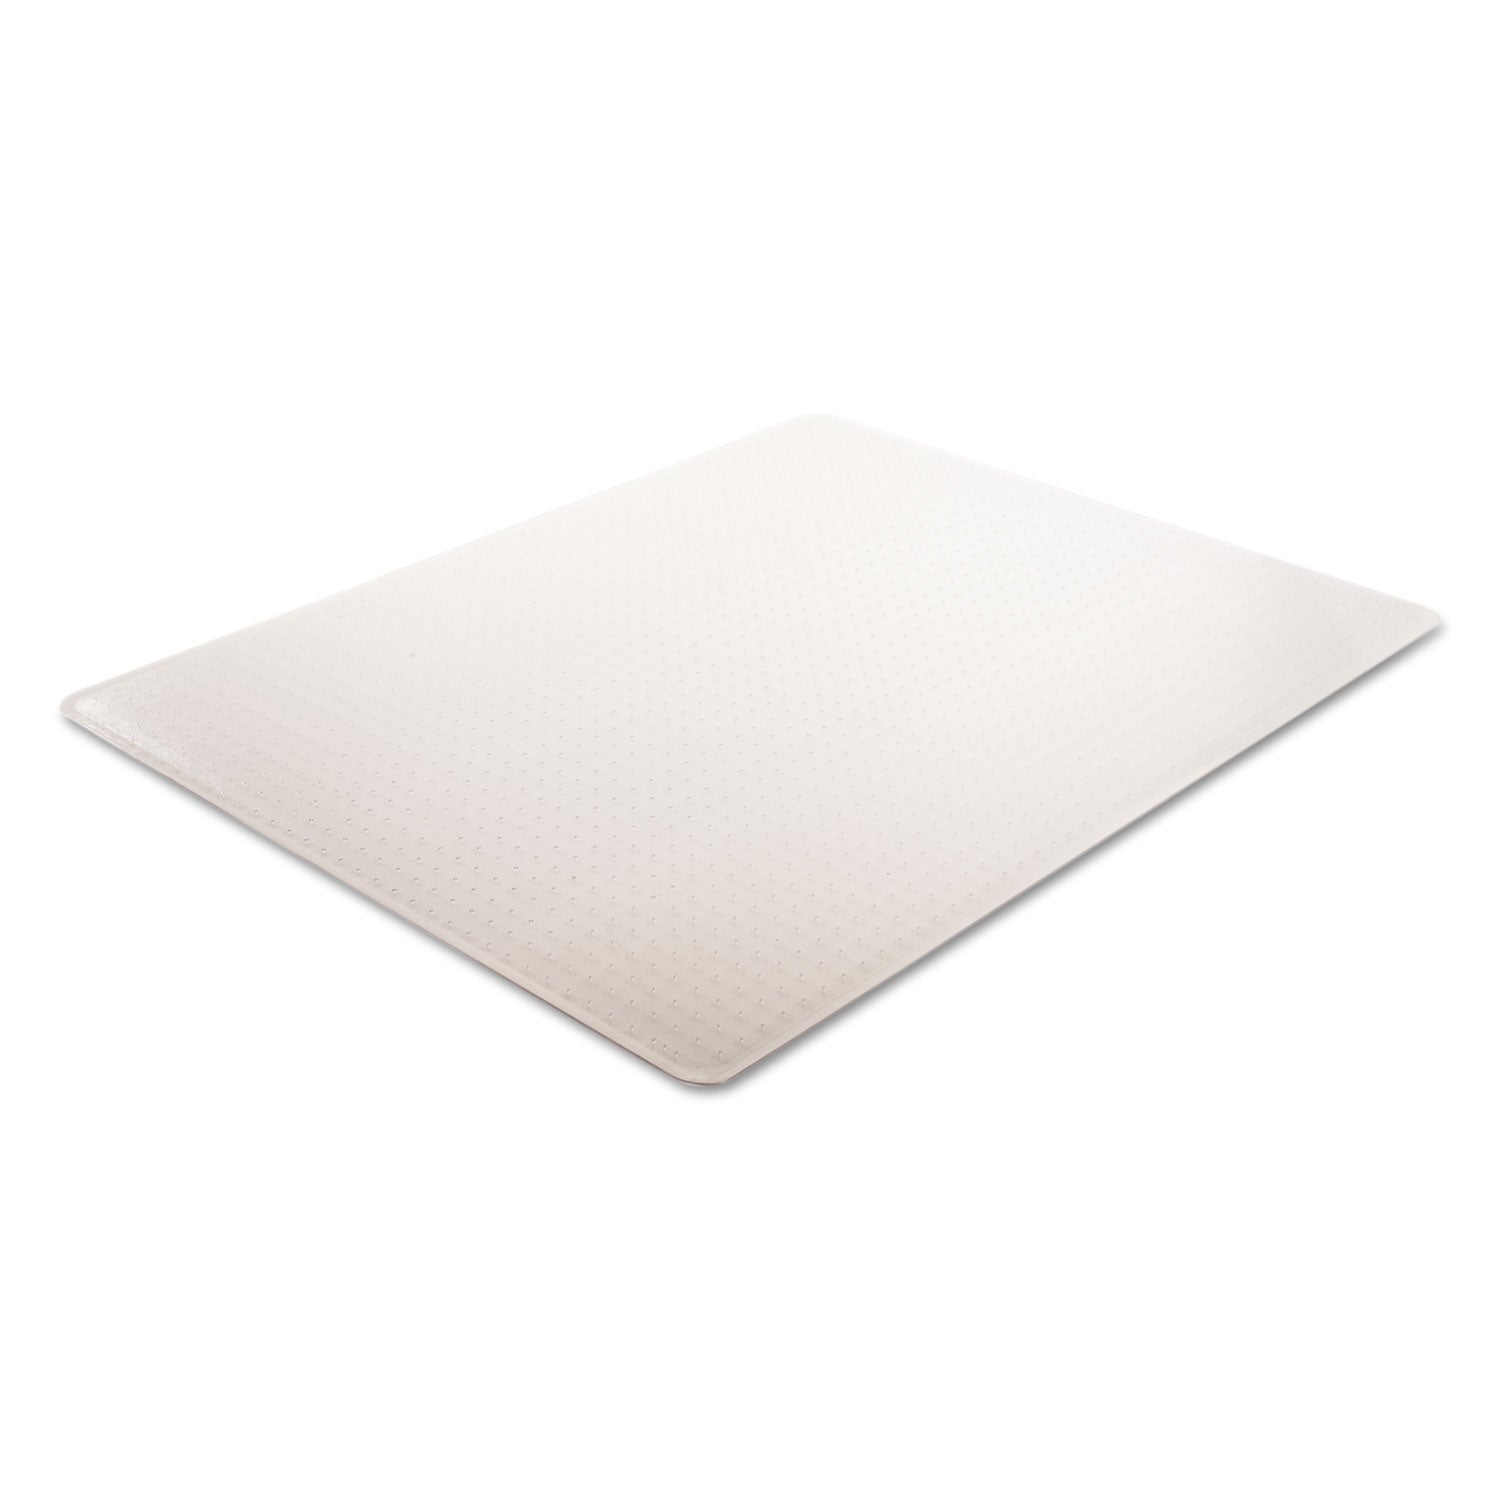 SuperMat Frequent Use Chair Mat, Med Pile Carpet, 45 x 53, Beveled Rectangle, Clear - 